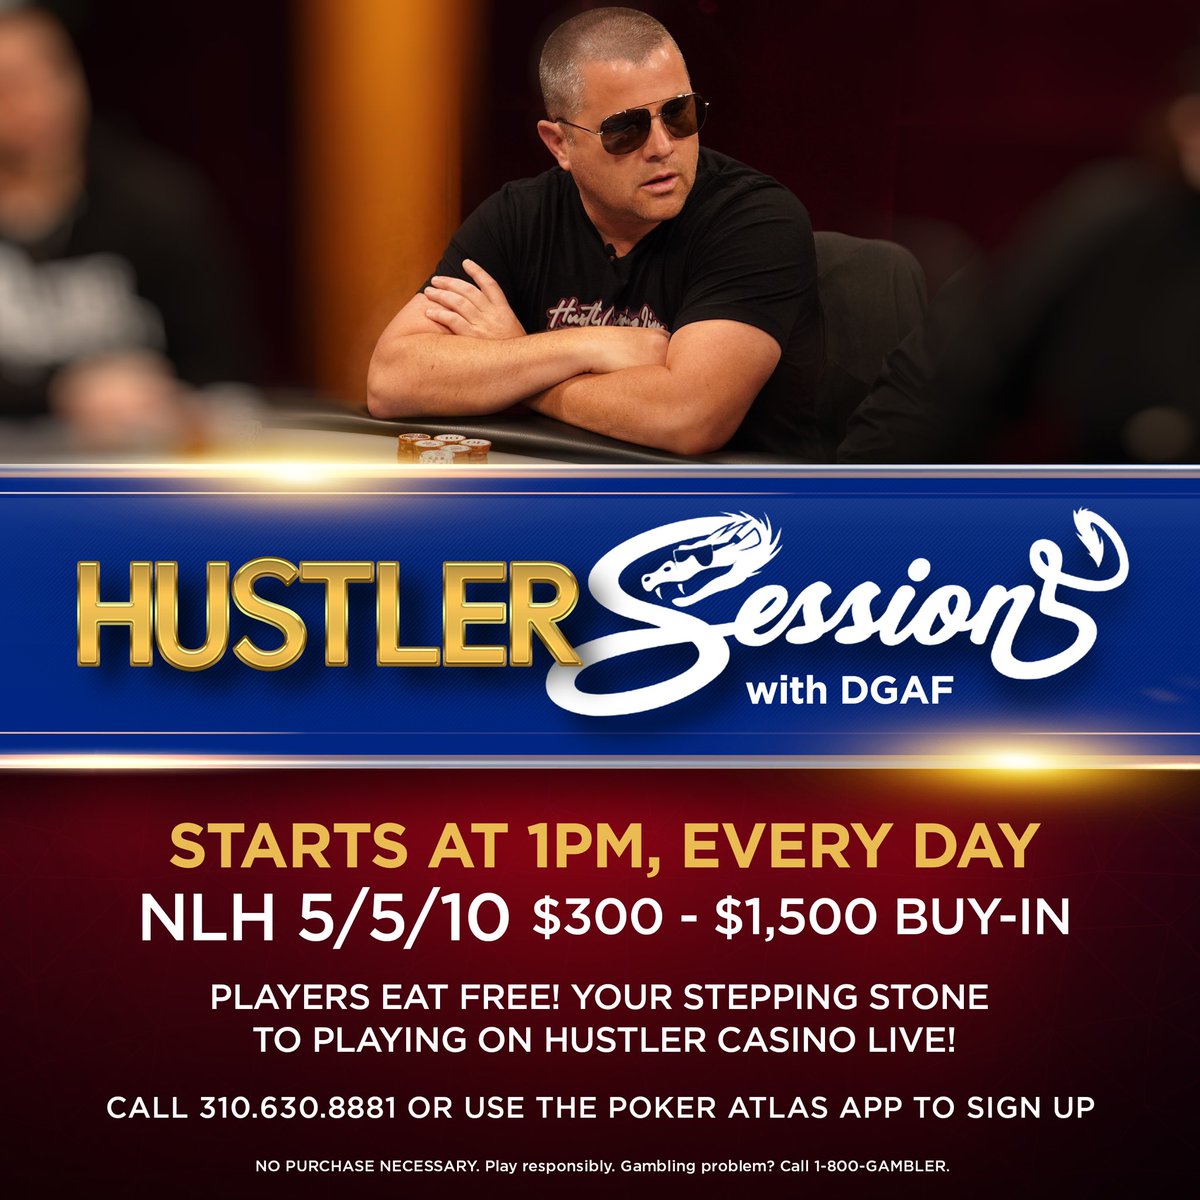 Happy Monday, LA Degens🌞 Start the week off right with some poker @HUSTLERCASINOLA ‼️ 5-5-10 NL starts at 1PM⏰ ✅Eat for free ✅Best action ✅Cool vibes Call 310-630-8881 or sign up on Poker Atlas!